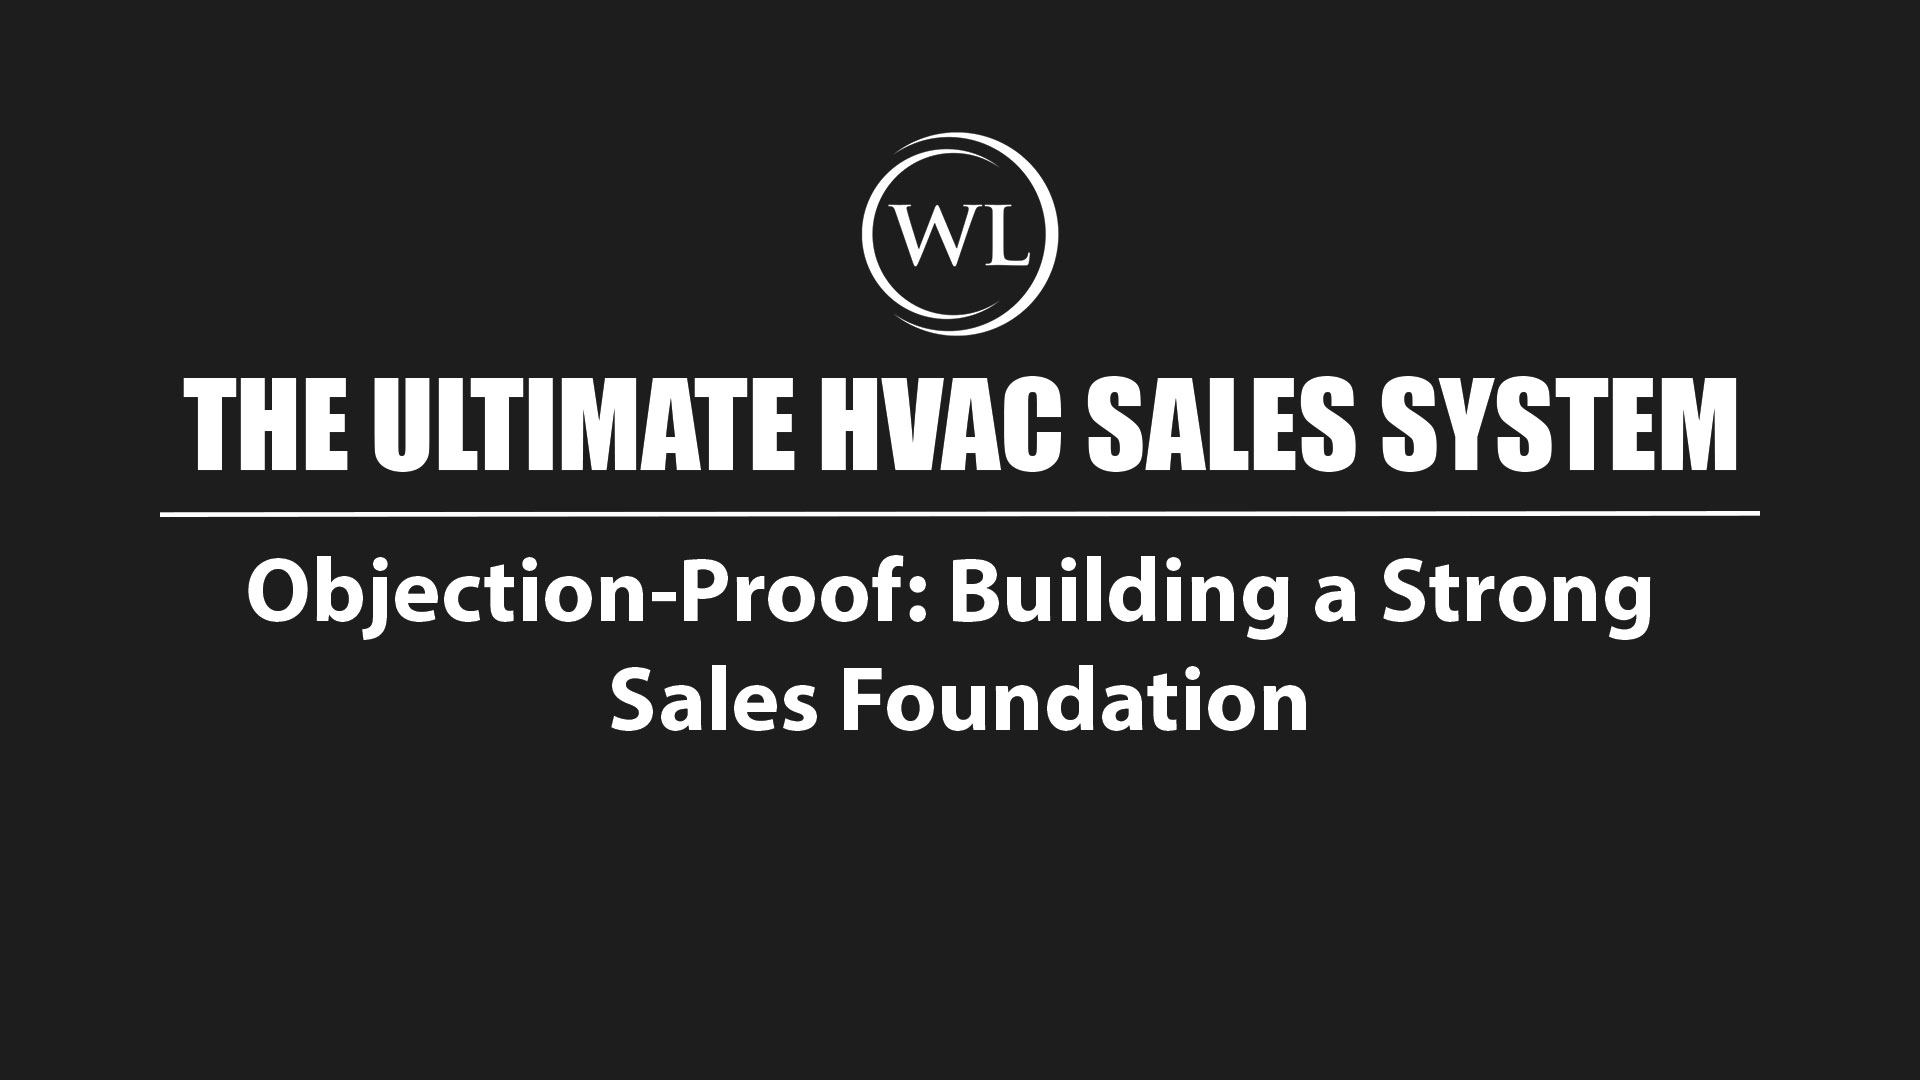 Objection-Proof: Building a Strong Sales Foundation